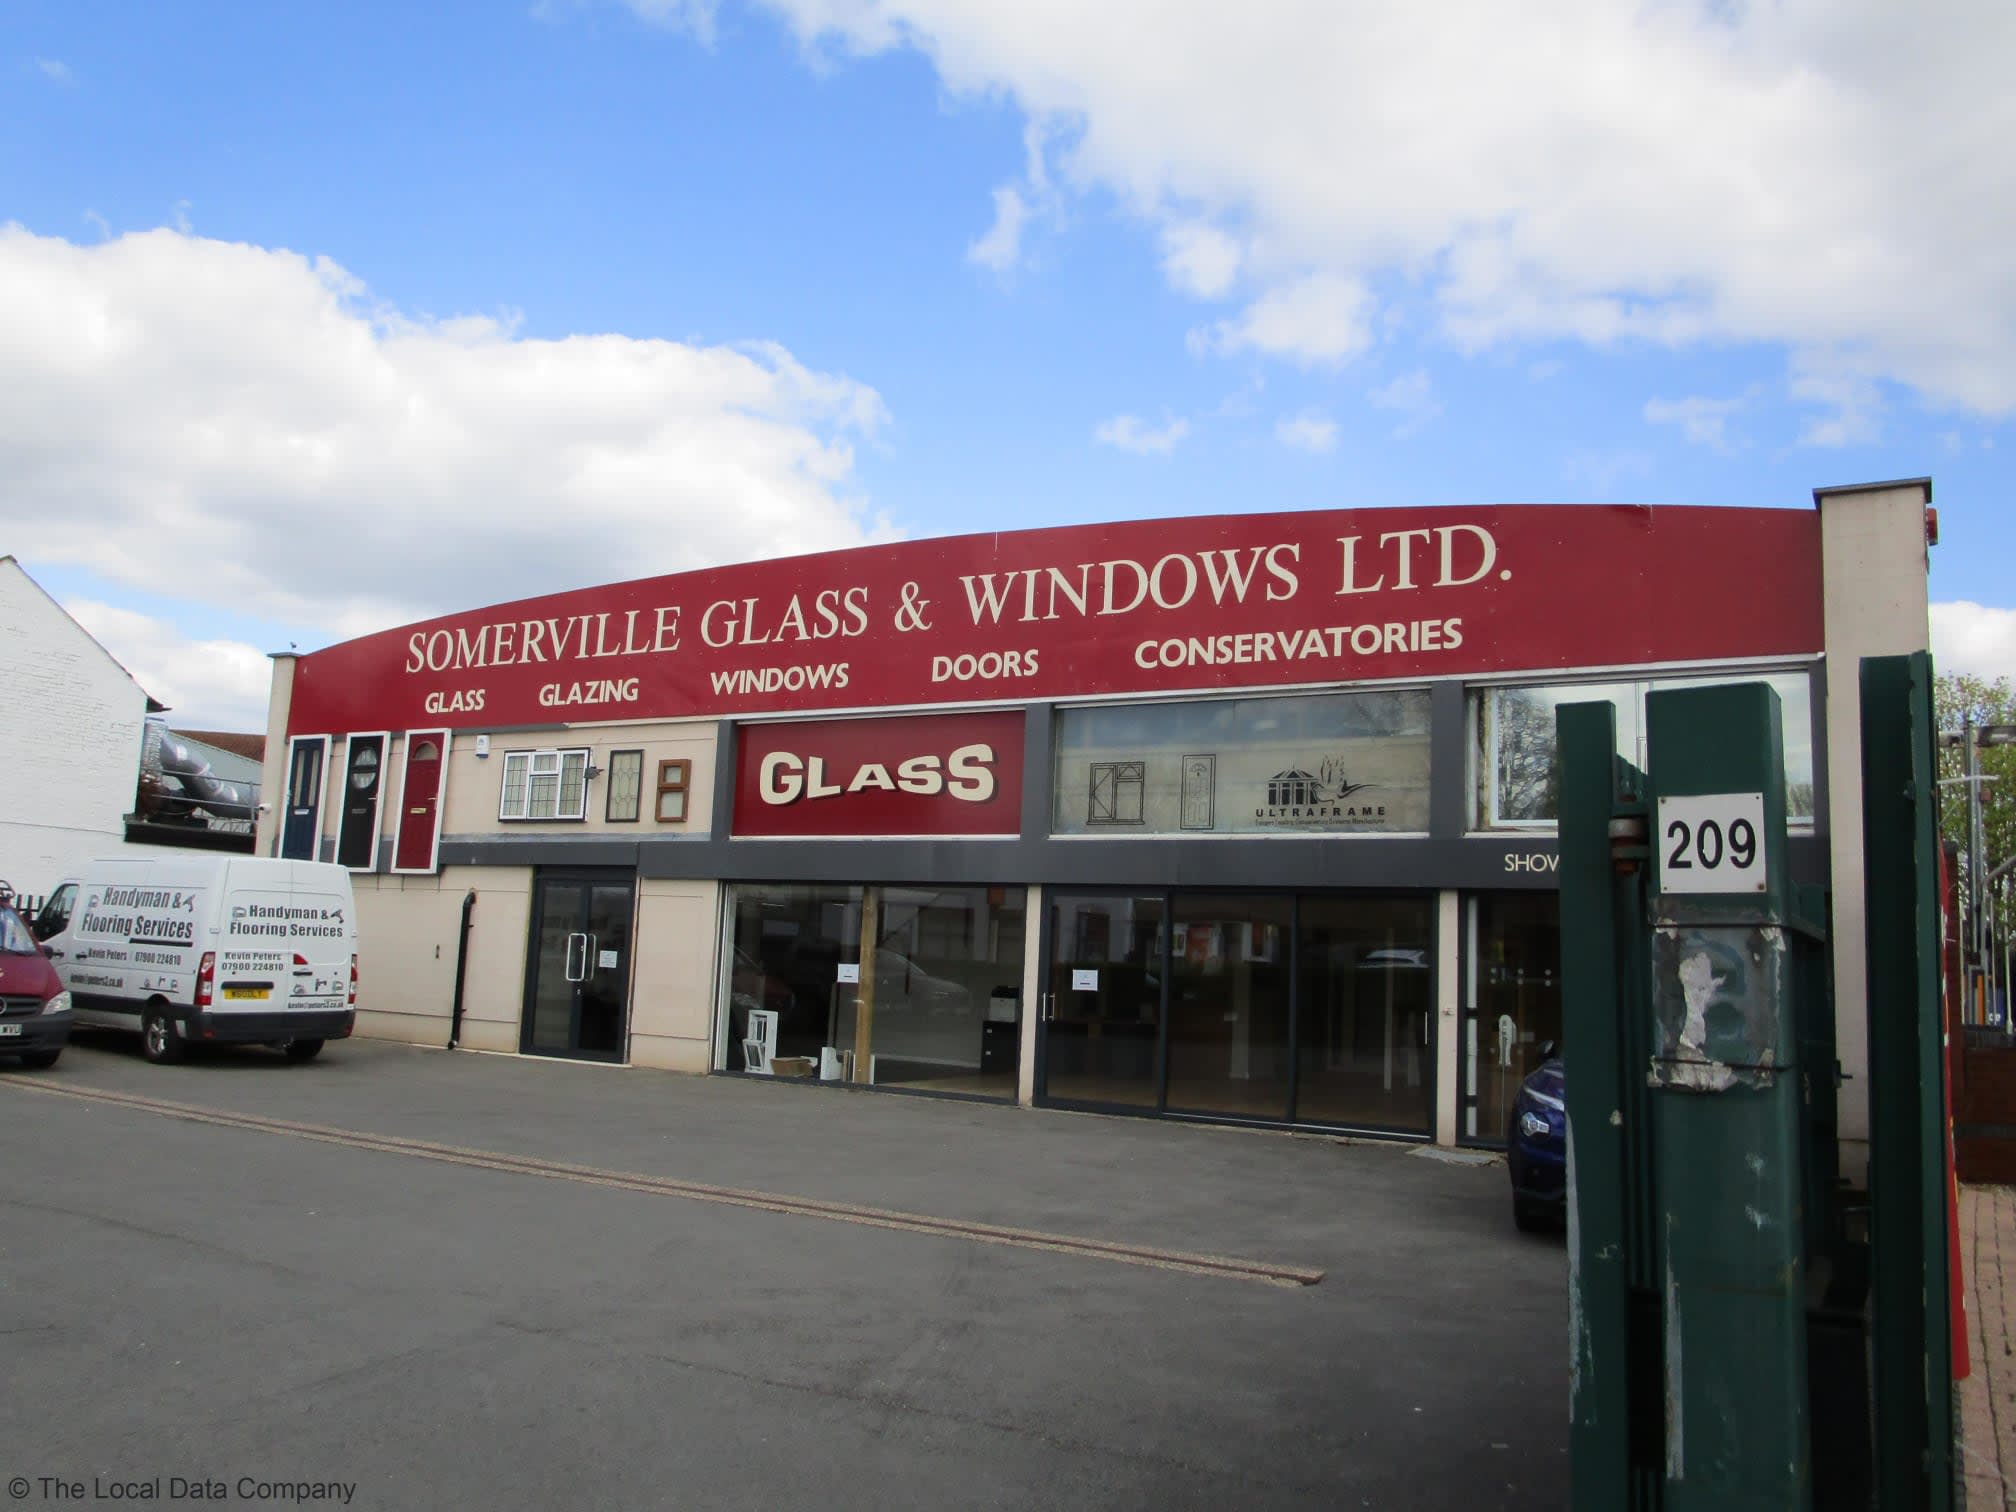 Images Somerville Glass and Windows Ltd